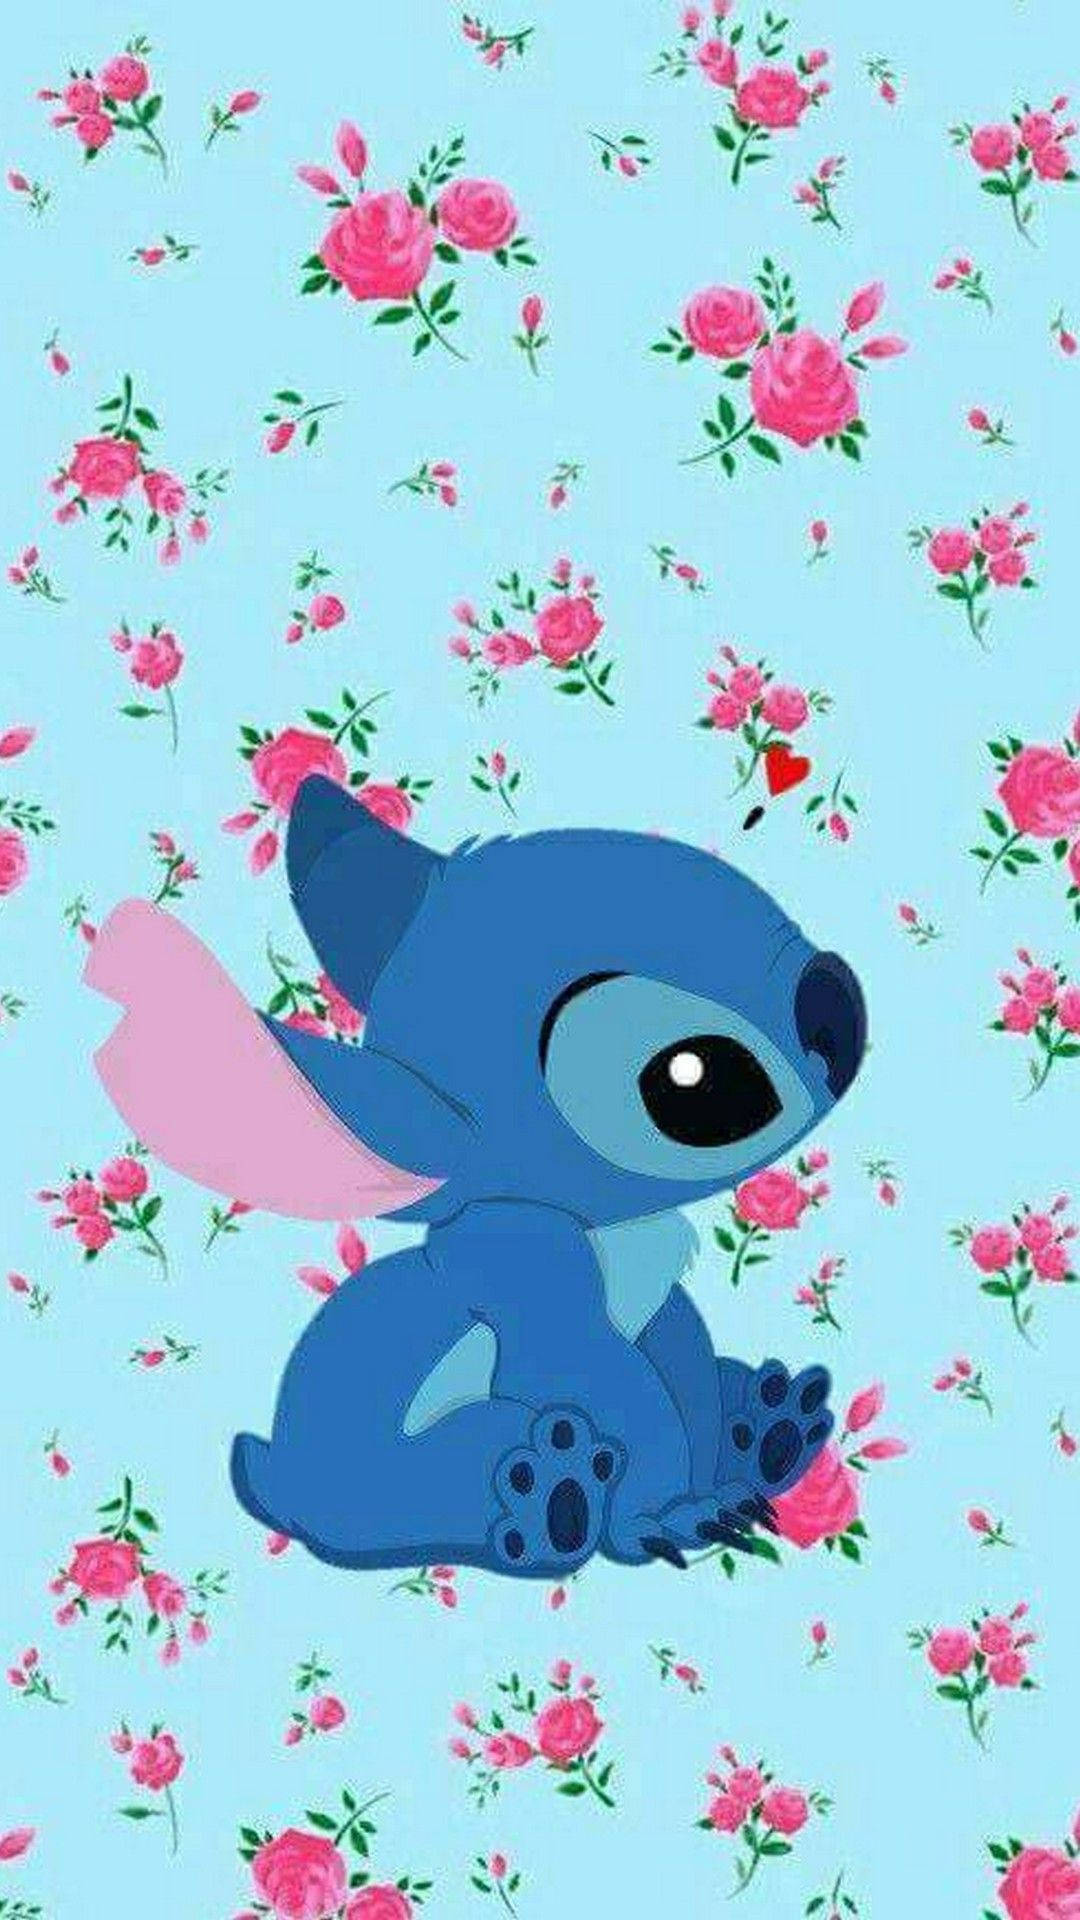 Stitch With Pink Roses